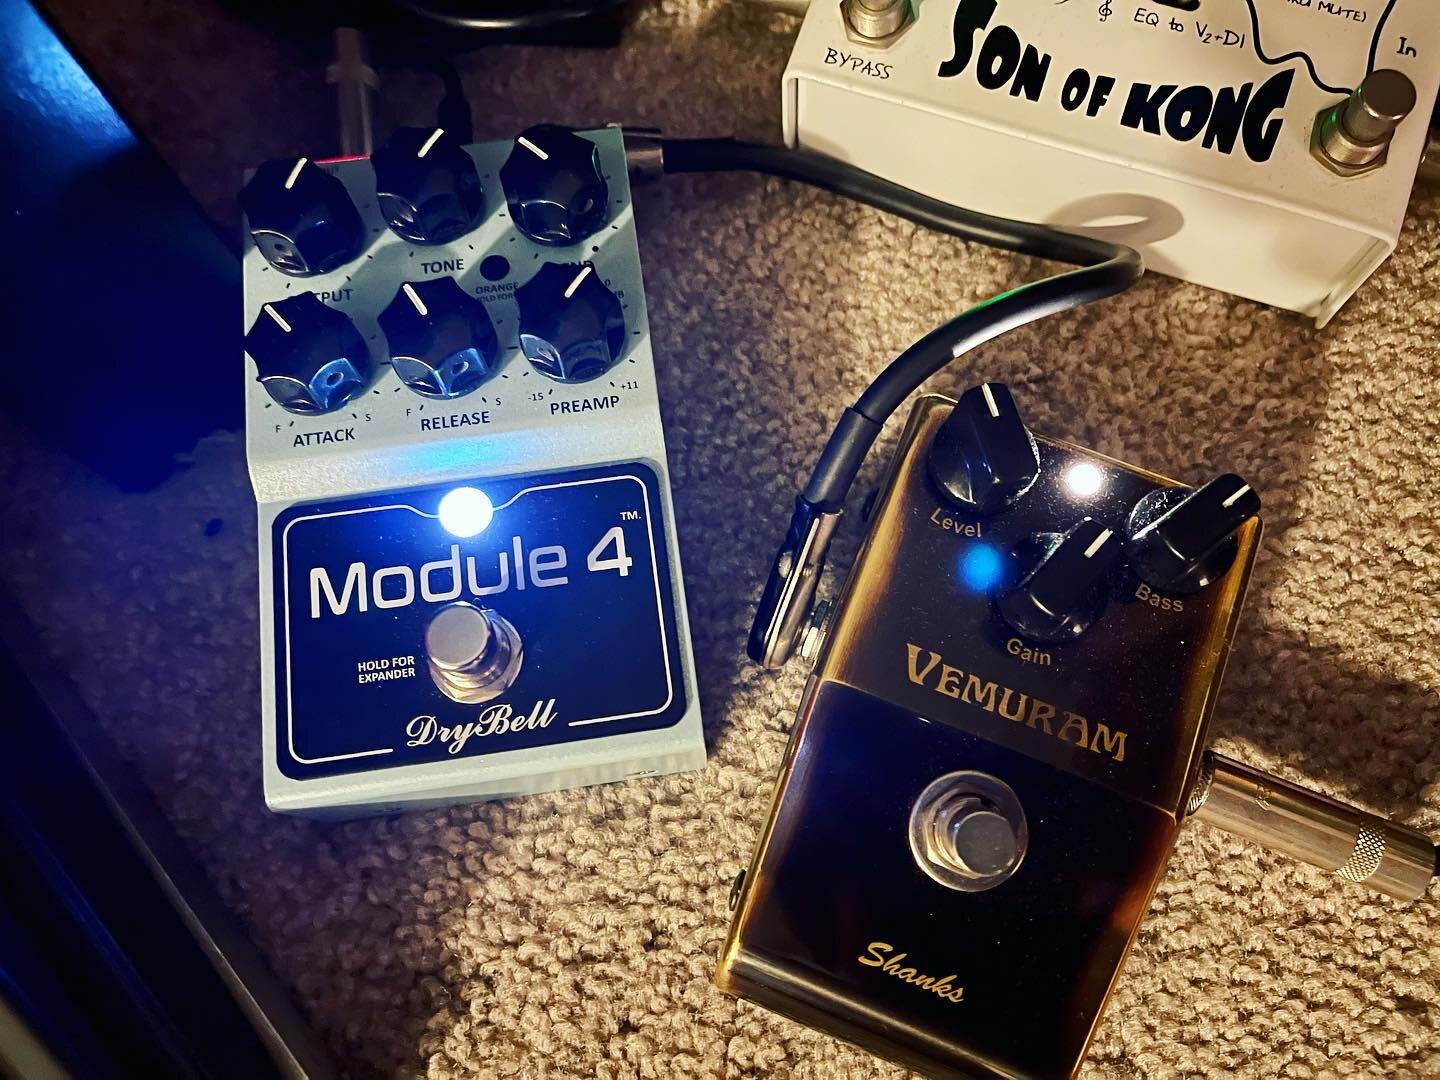 This new @drybell1996 Module 4 Compressor is incredible. #gearheadsfeature forthcoming 🤘🏻 sounds incredible with the @vemuram_official #shanks3k too!